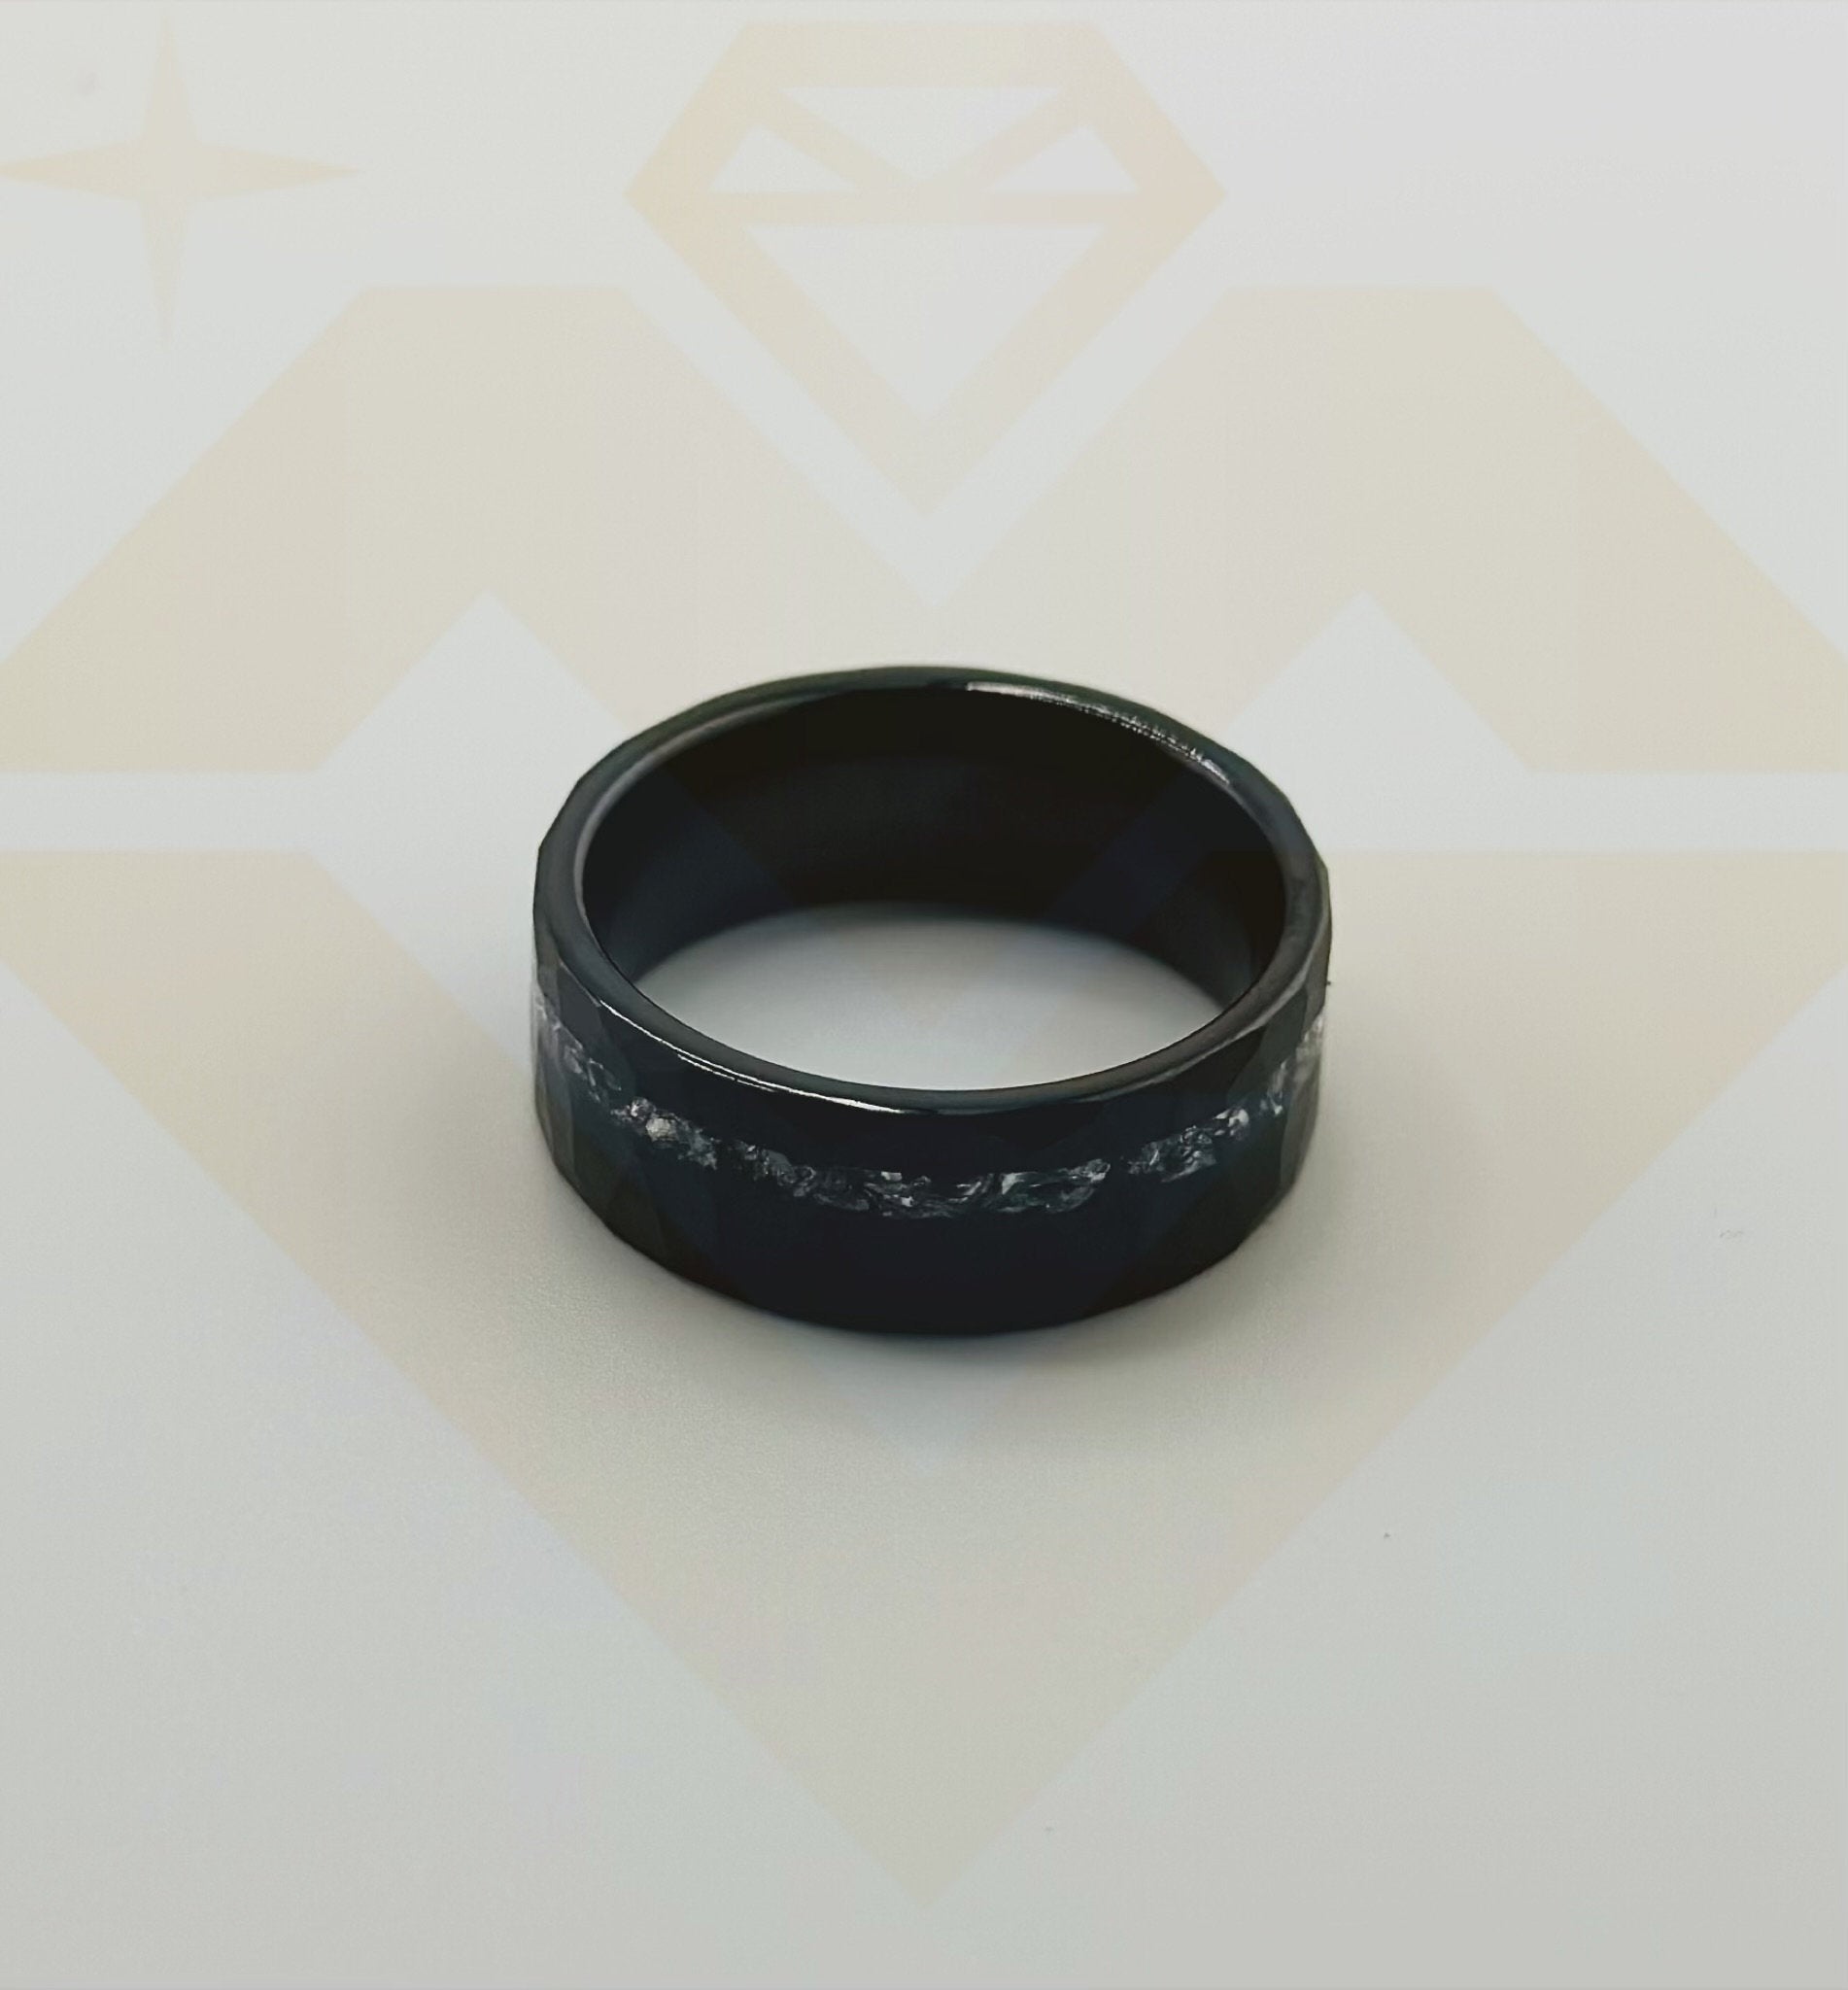 Rare Black Meteorite Crystal Tungsten Hand crafted unique Band for men, Wedding band, Engagement proposal promise ring for men Gifts for him